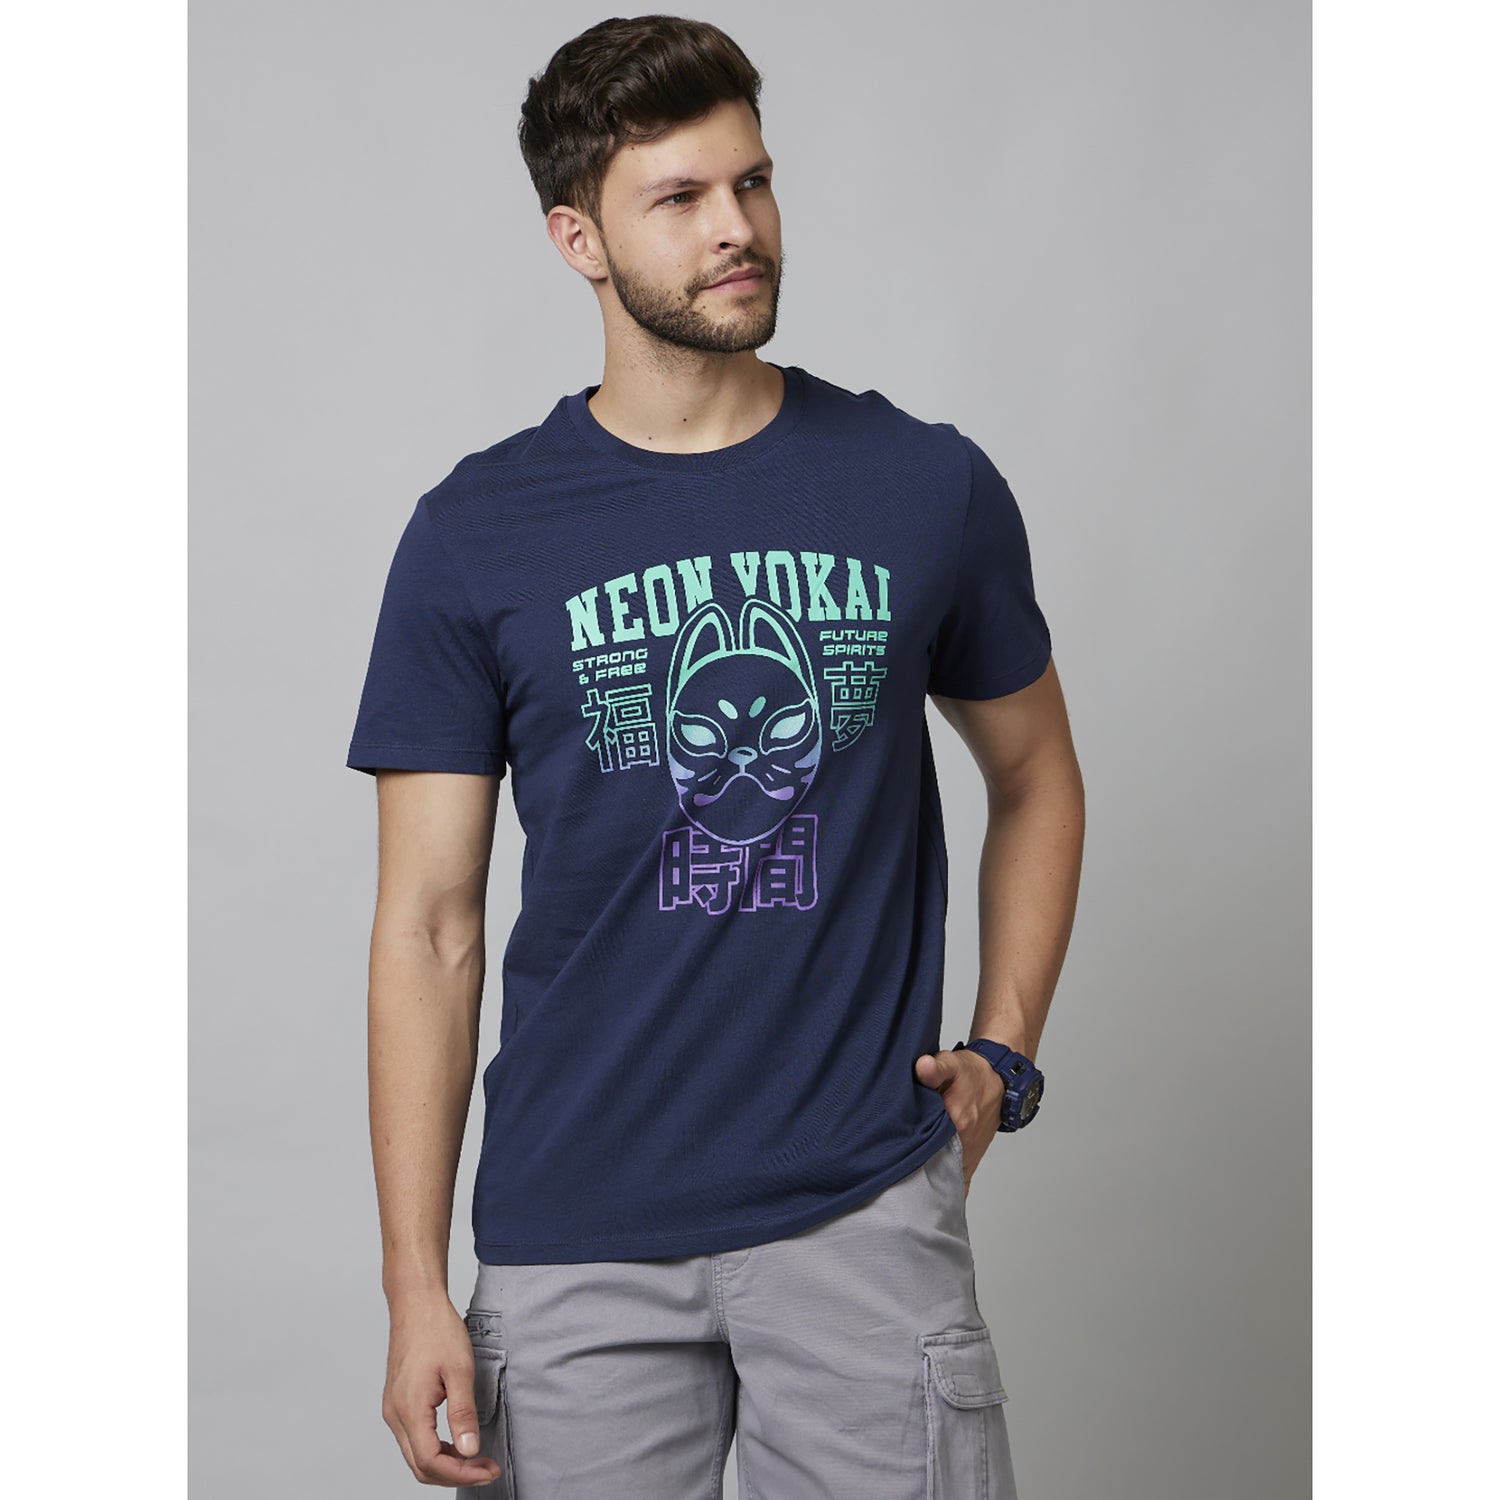 Navy Graphic Printed Short Sleeve Cotton T-Shirts (FEONJAP)